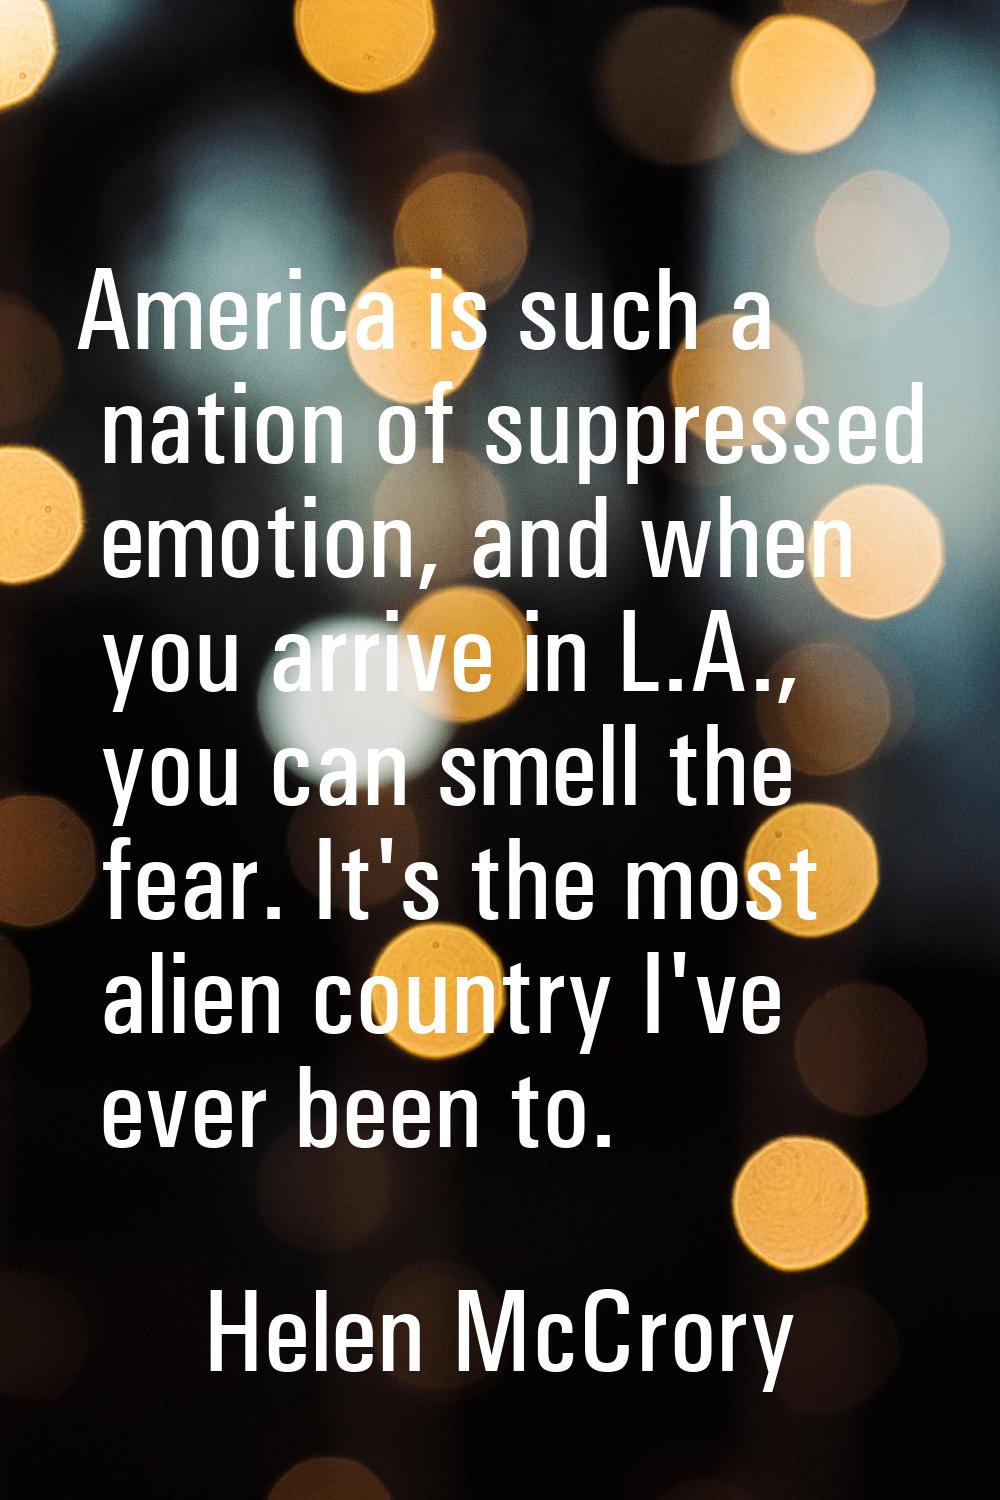 America is such a nation of suppressed emotion, and when you arrive in L.A., you can smell the fear